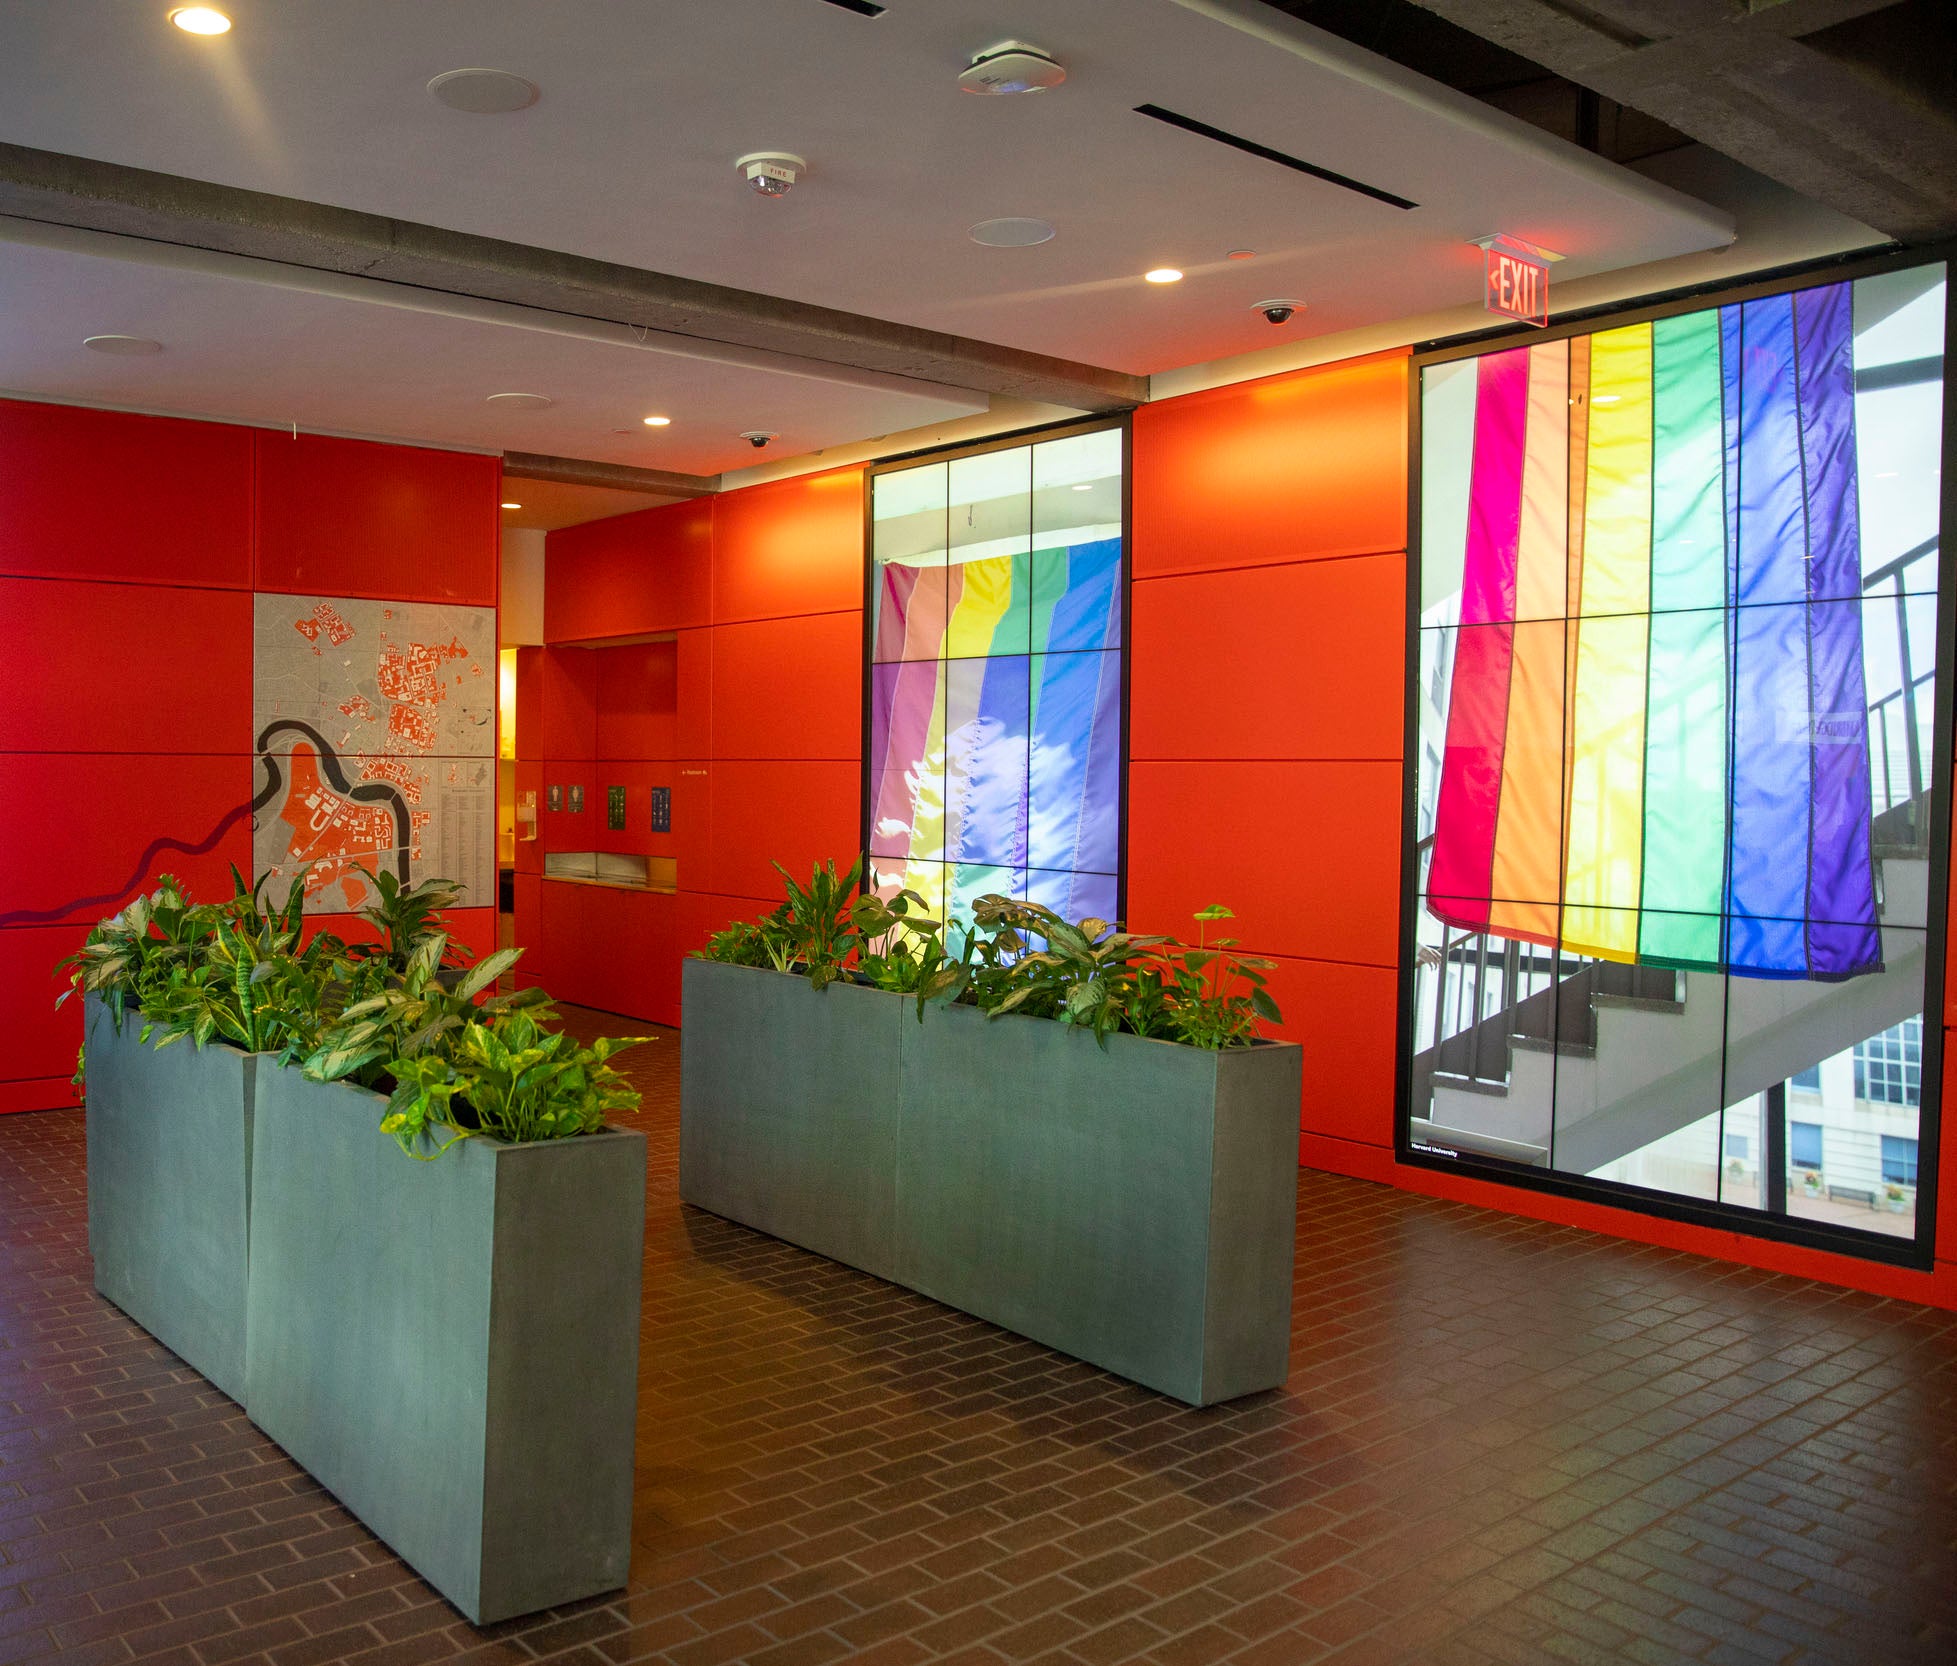 Pride flags hang in the windows in a room with plants in it